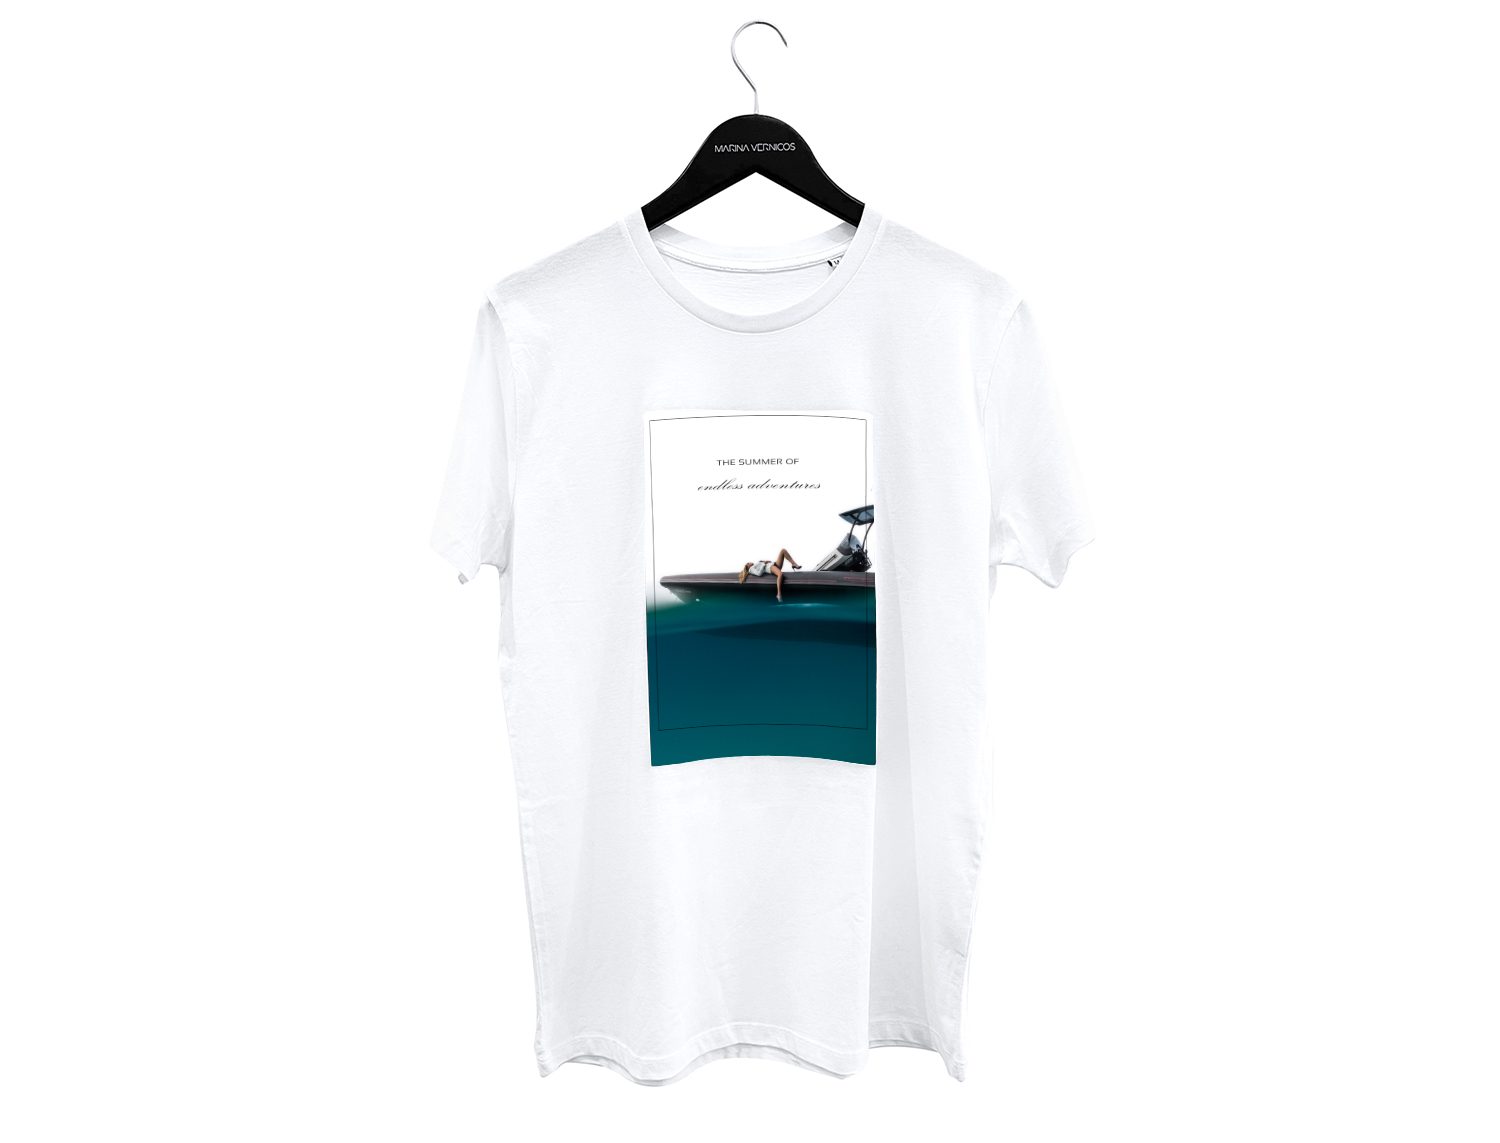 The Summer of endless Adventures - White T-Shirt